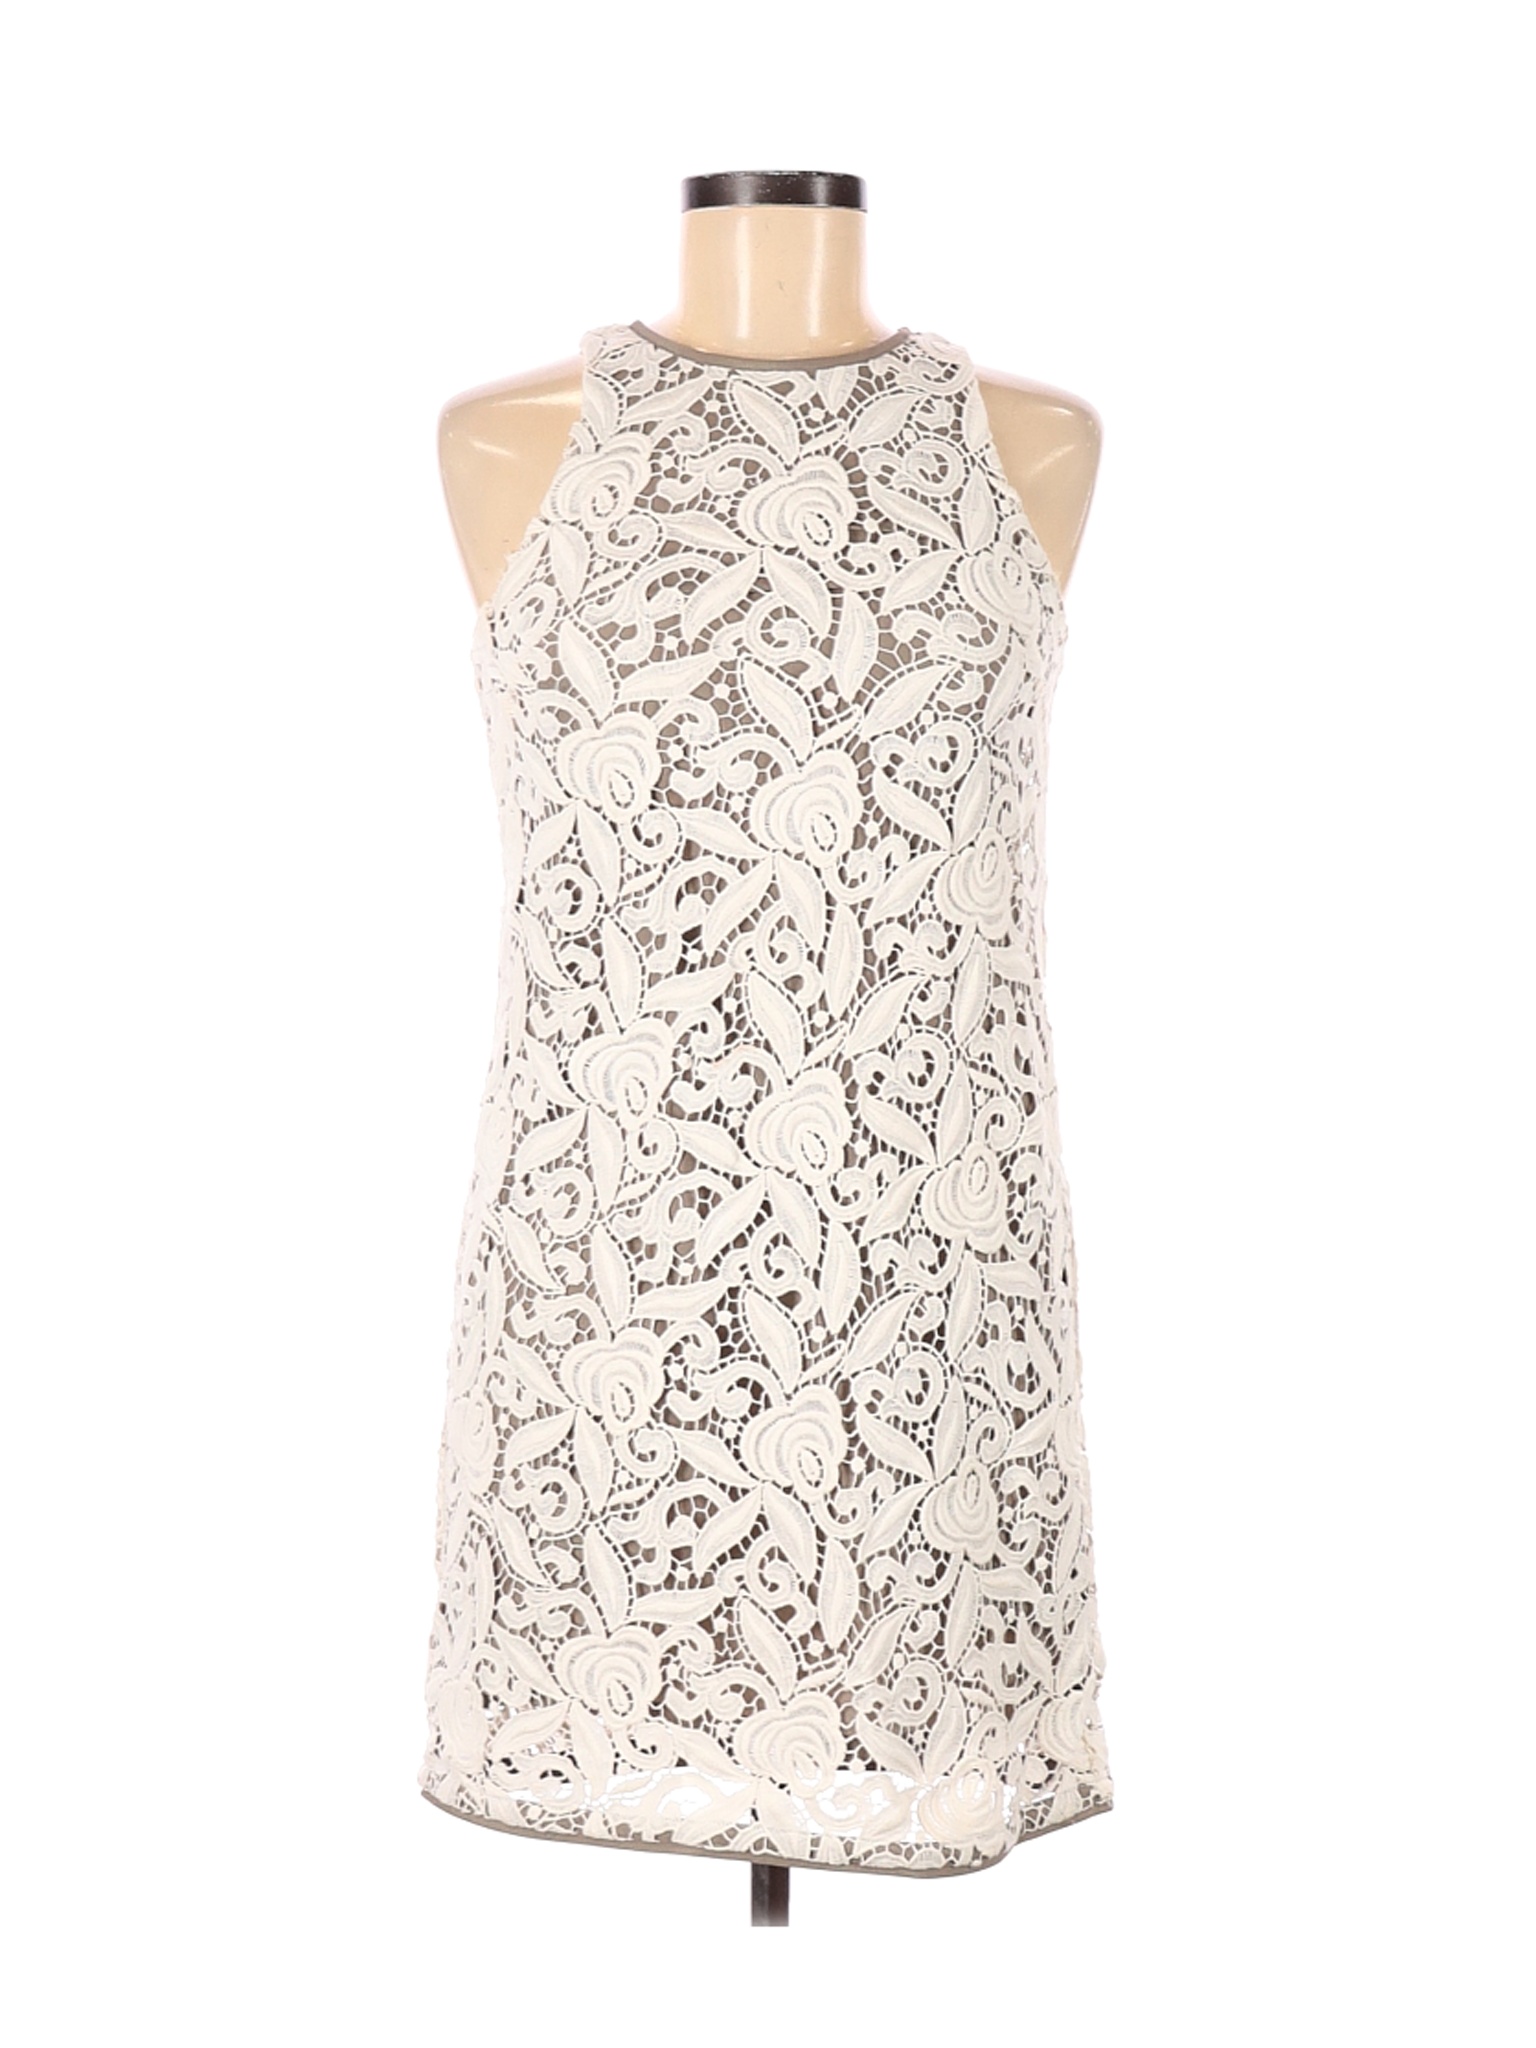 Juicy Couture Women Ivory Casual Dress 0 | eBay